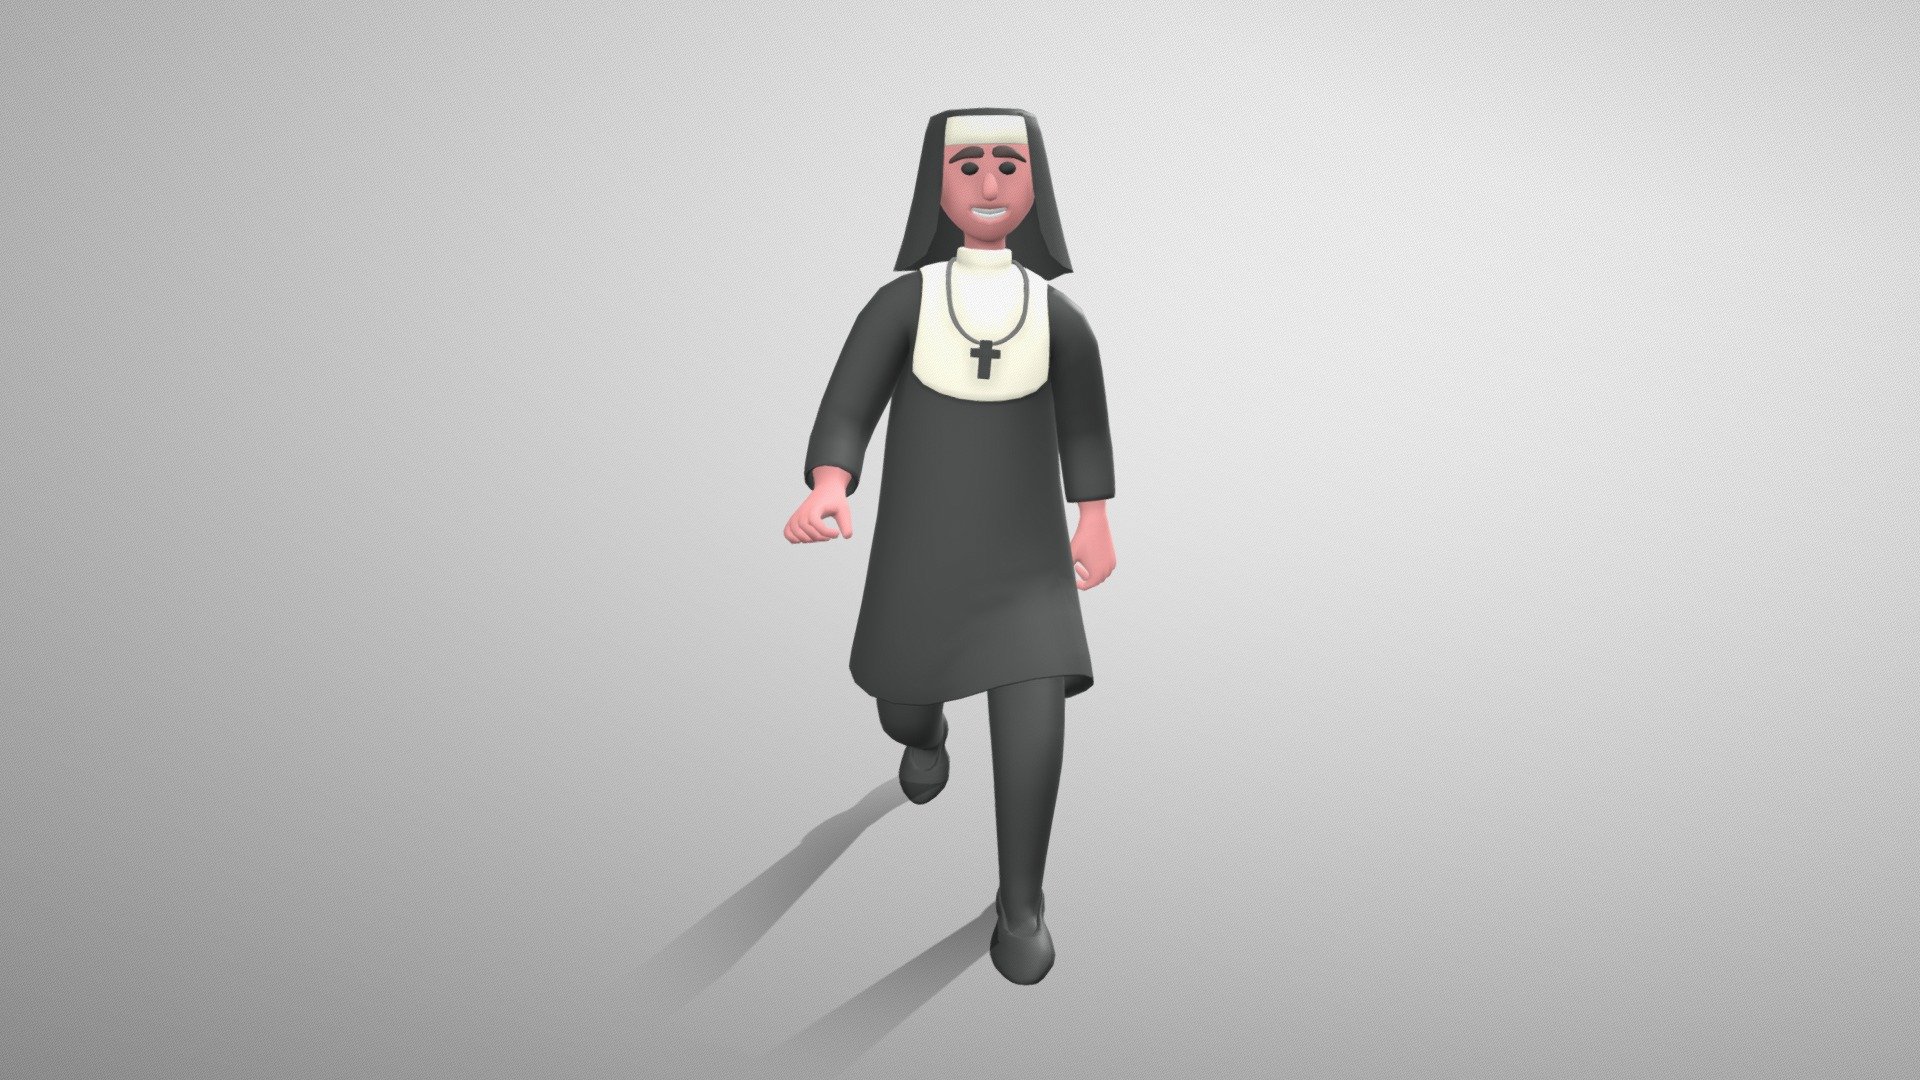 Stylized Nun Christian is the part of the big characters bundle. These stylized 3D characters might be useful for motion graphics design, cartoon production, game development, illustrations and many other industries.

The 3D model is rigged and ready to use with Mixamo. You can apply any Mixamo animation in one click . We also added 12 widely used animations.

The character model is well optimized and subdivision ready. You can choose any smoothing option you want, according to your project.

The model has only a single texture. It is useful for mobile game development and it's easy to change colors of clothes, skin etc.

If you have any questions or suggestions on improving our product, feel free to send a message to mail@dreamlab.net.ua - Stylized Nun - Mixamo Rigged Character - Buy Royalty Free 3D model by Dream Lab (@dreamlabanim) 3d model